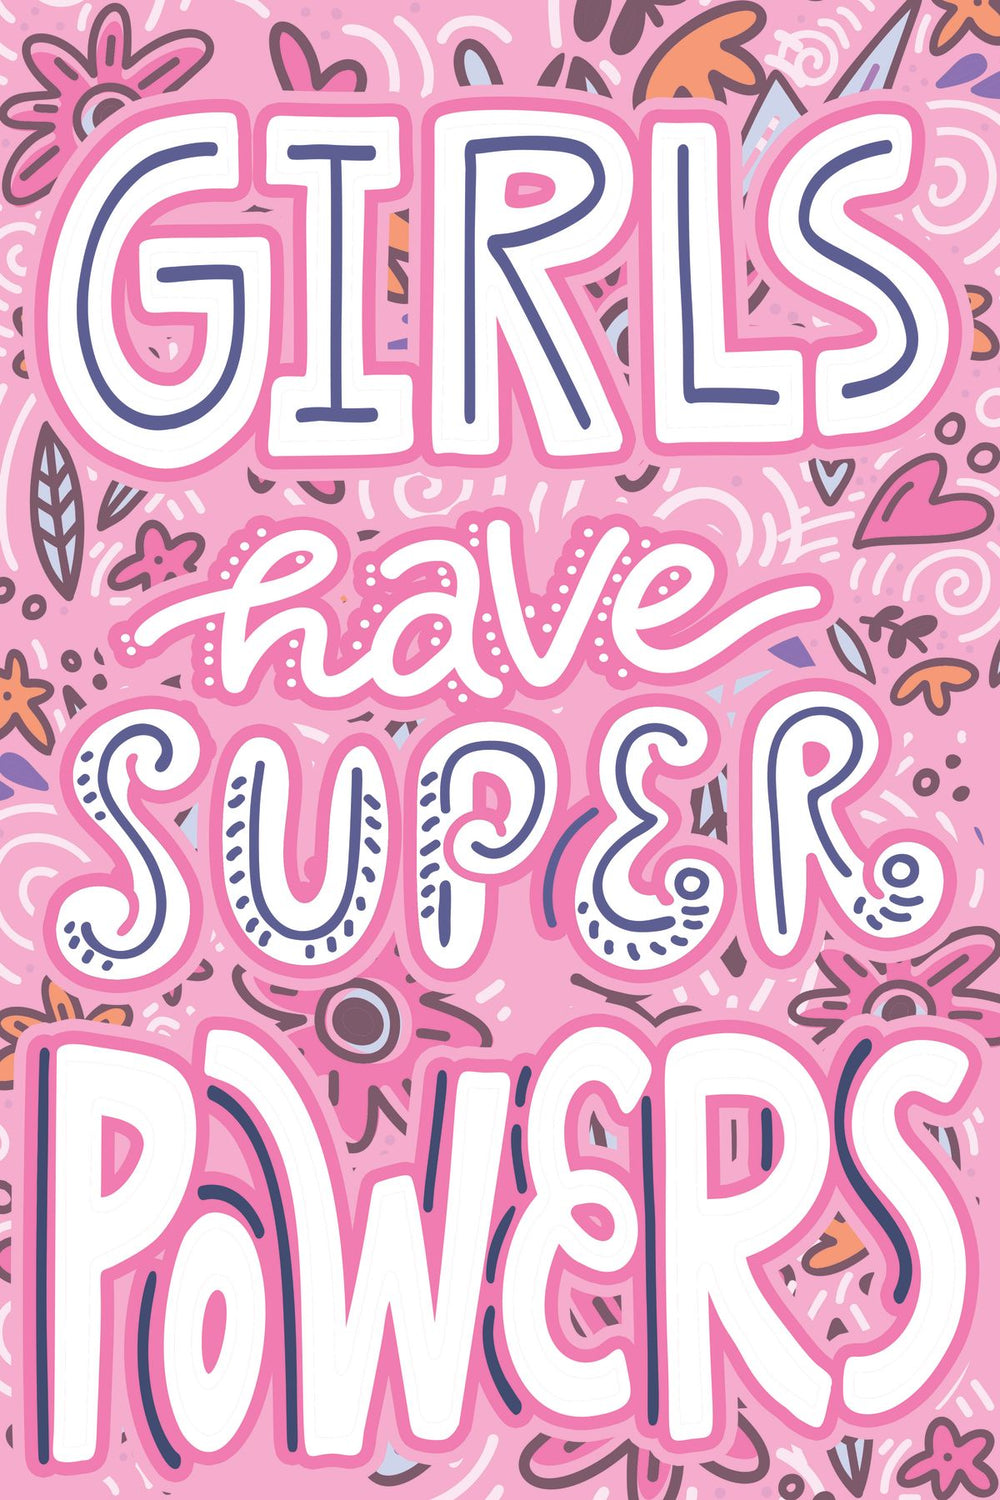 Girls Have Super Powers